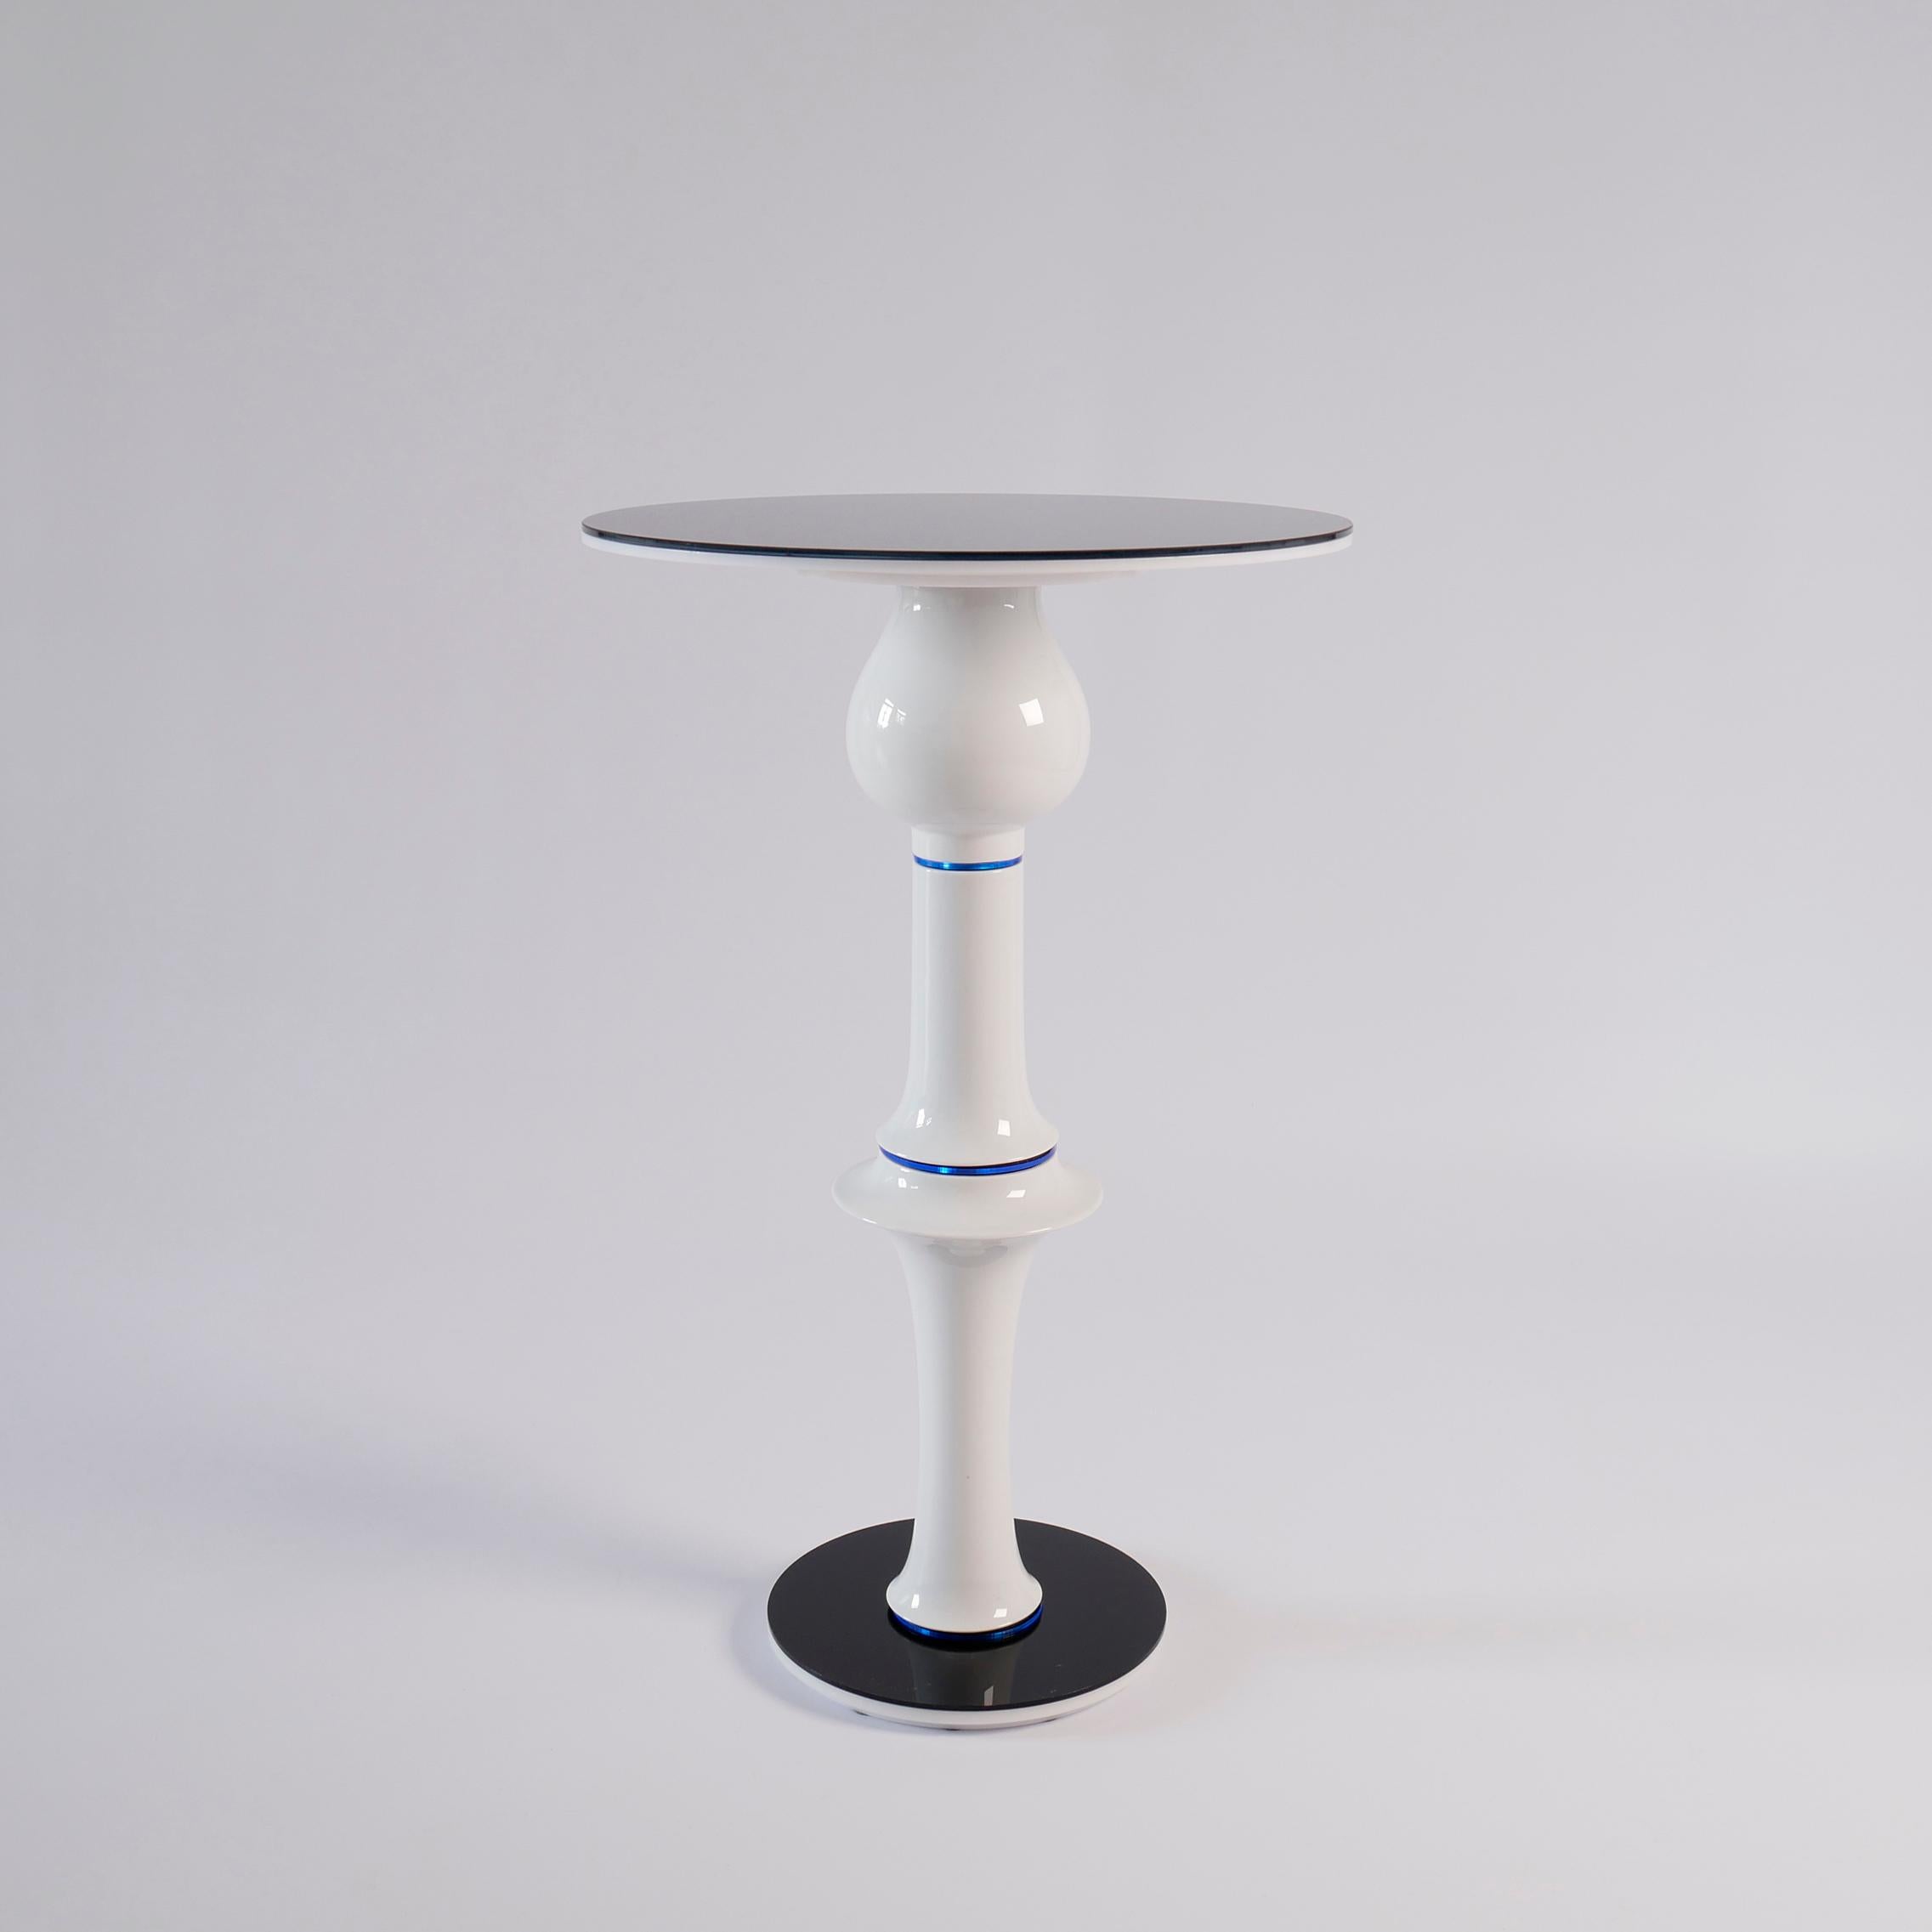 'Aeroplane' Side Table, Vintage Ceramics and Glass, One off Piece For Sale 4